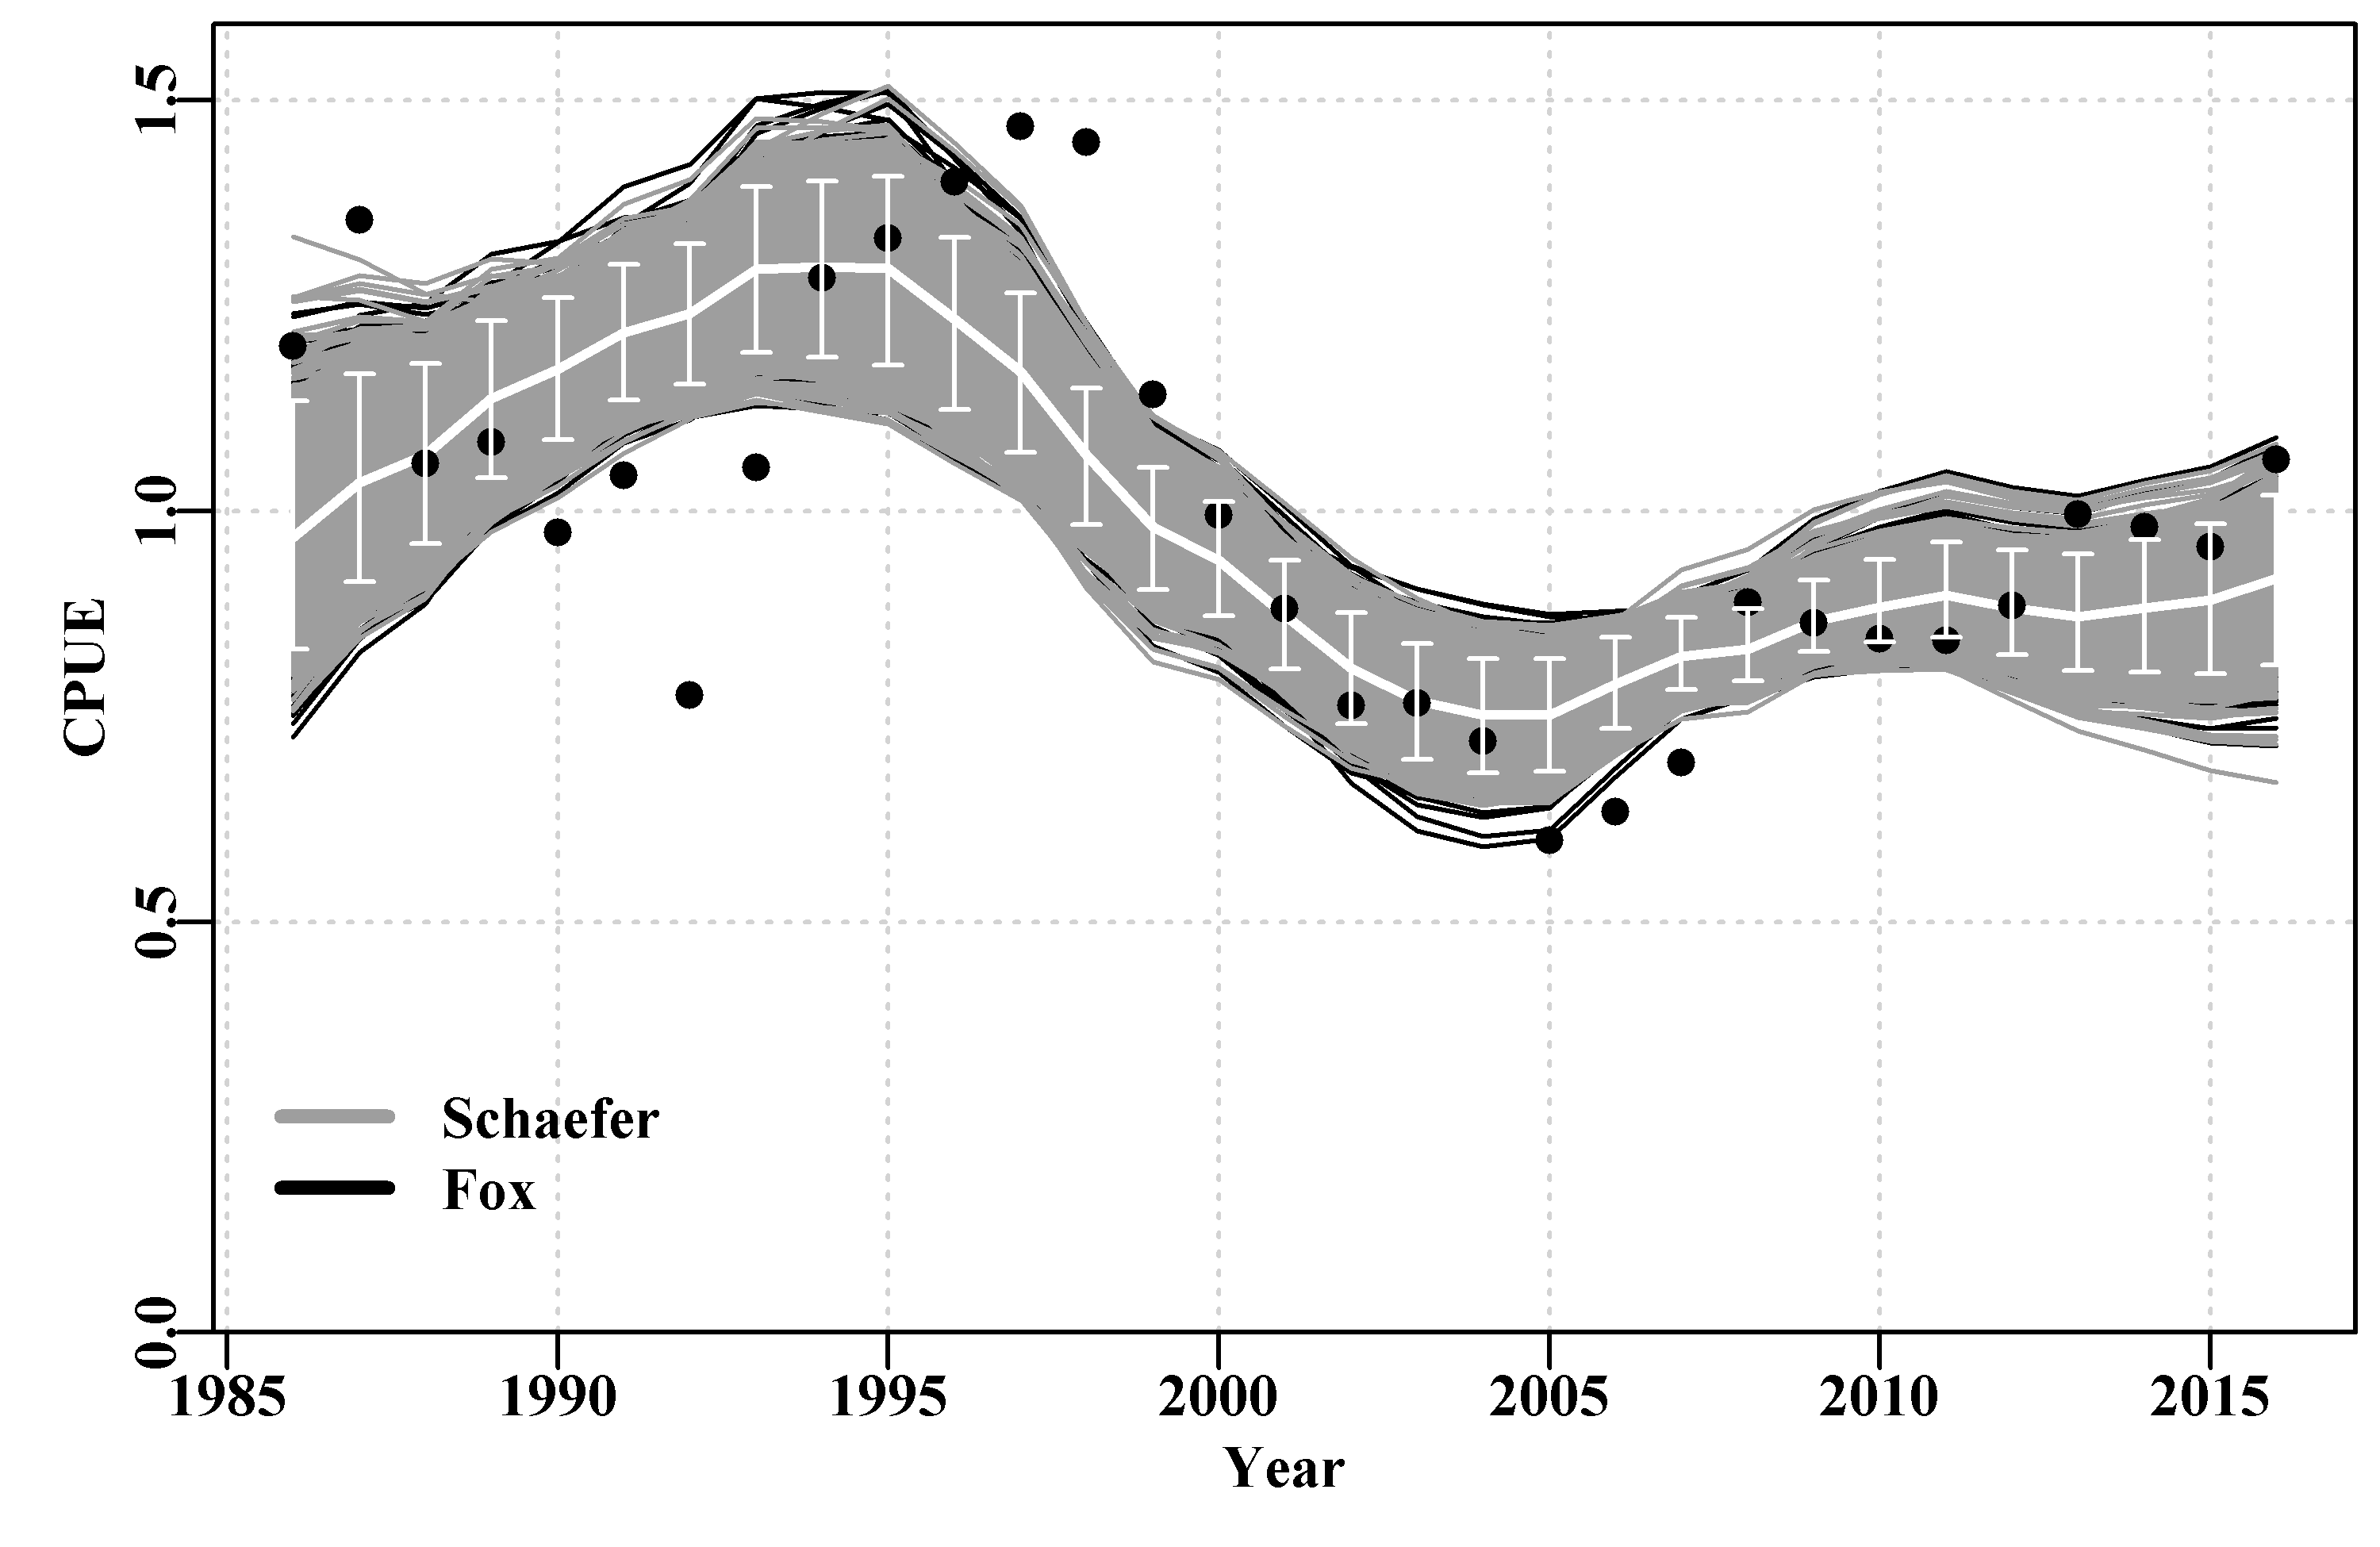 A plot of the original observed CPUE (dots), the optimum predicted CPUE (solid white line) with the 90th percentile confidence intervals (the white bars). The black lines are the Fox model bootstrap replicates while the grey lines over the black are those from the Schaefer model. 